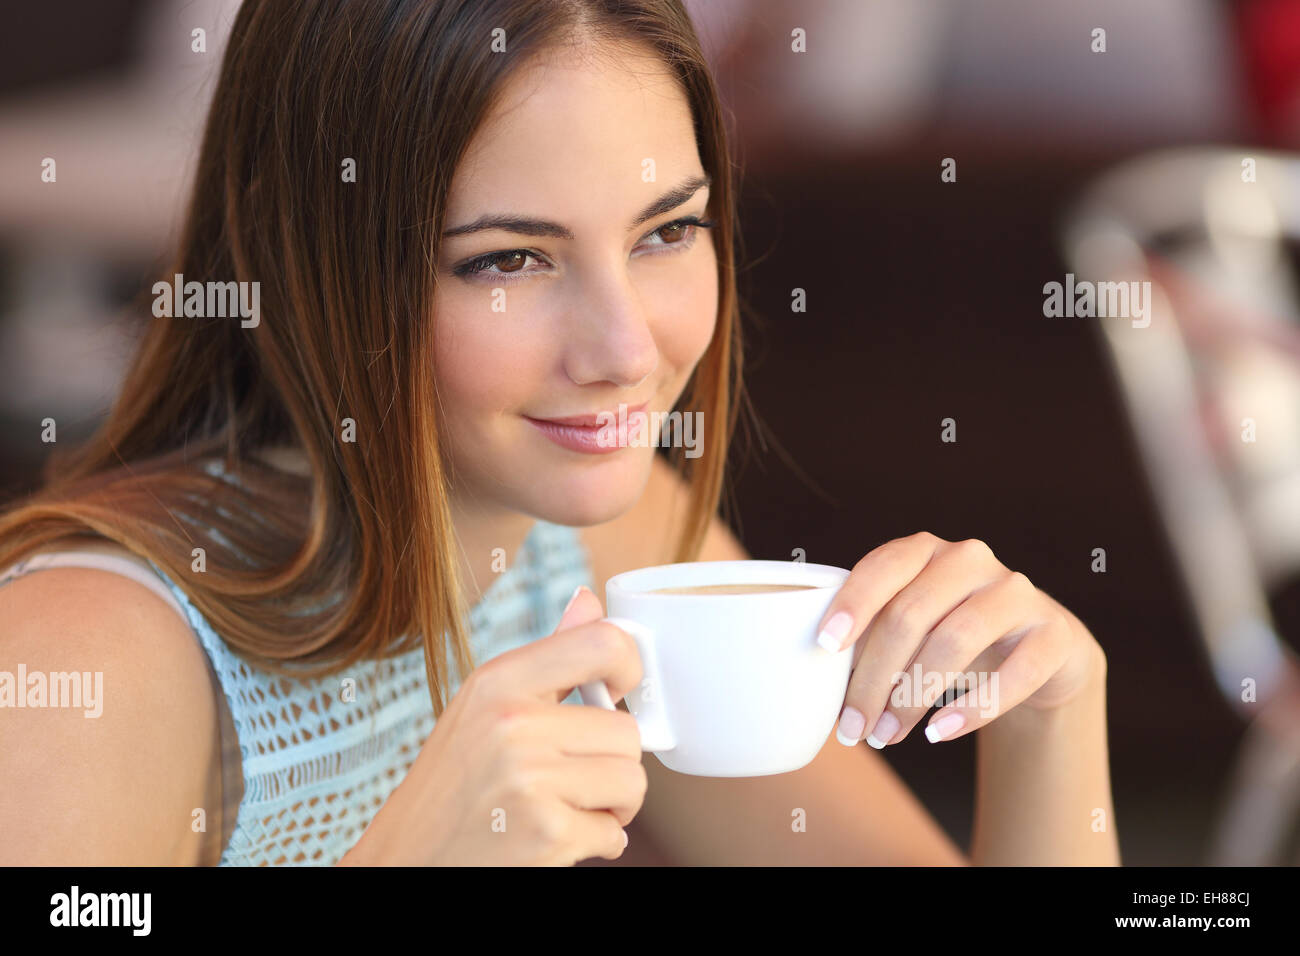 Candid woman thinking in a coffee shop holding a cup with an unfocused background Stock Photo